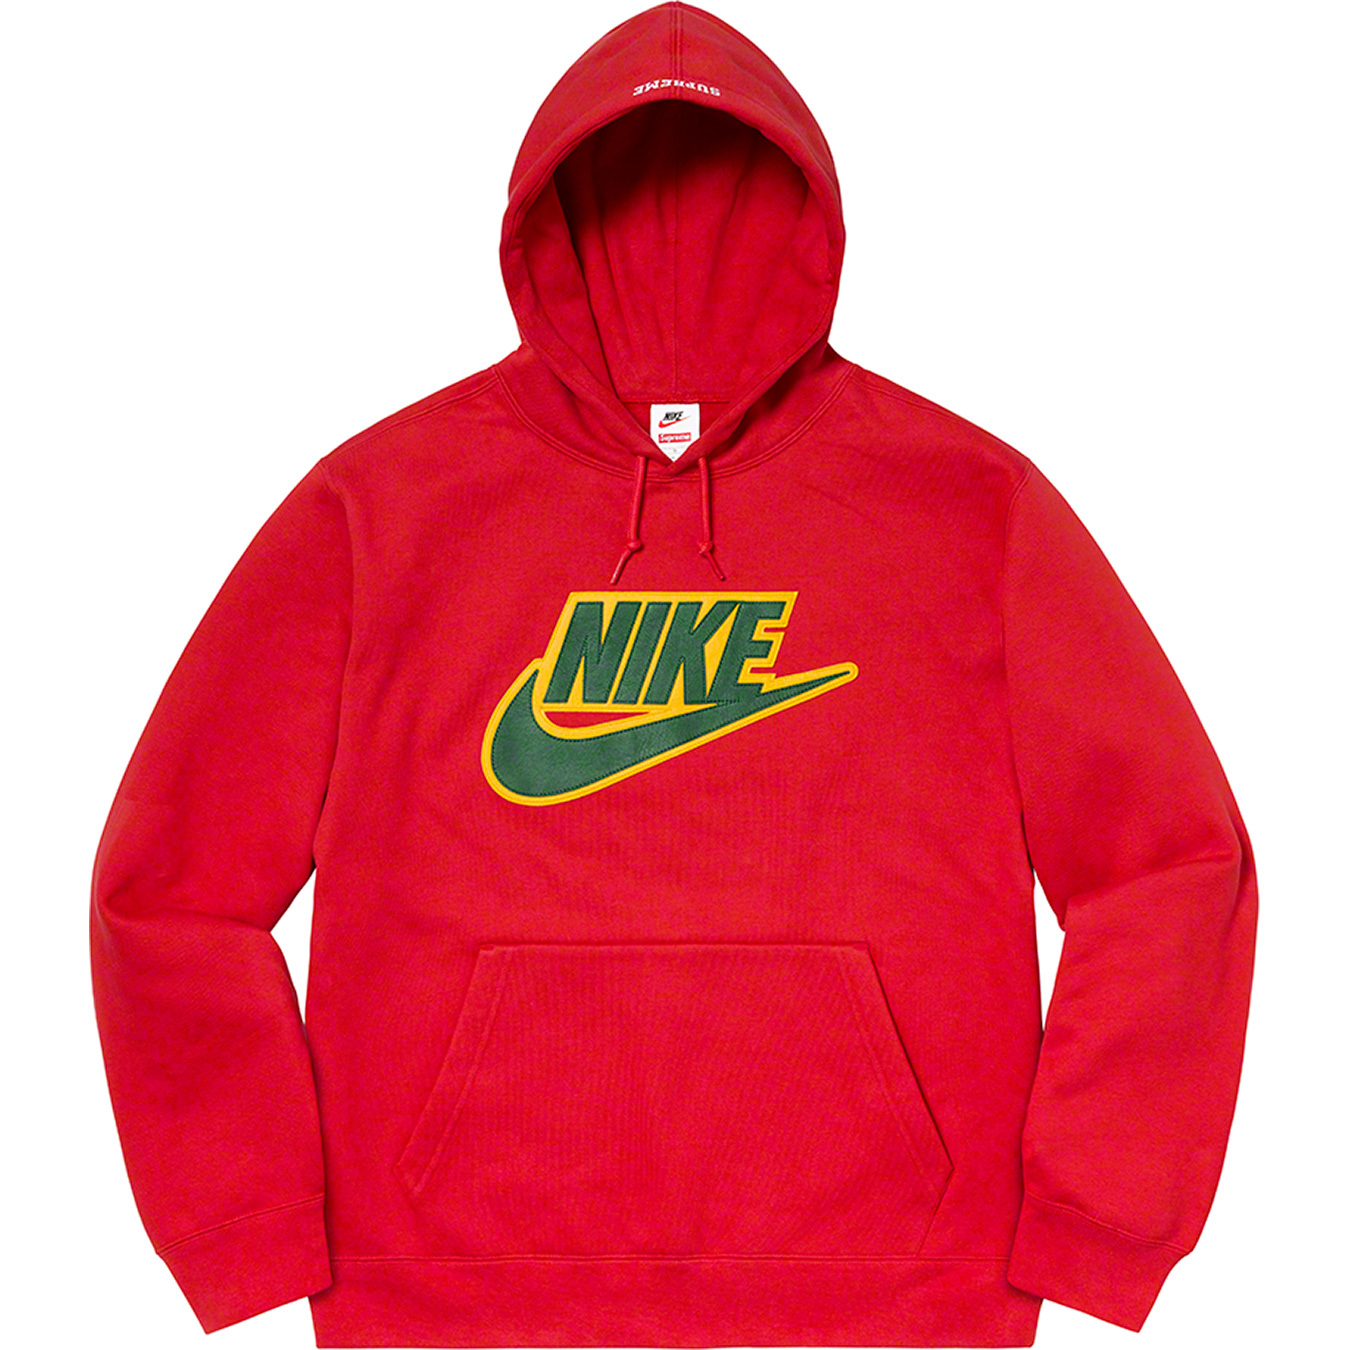 Supreme
Nike Leather Applique Hooded